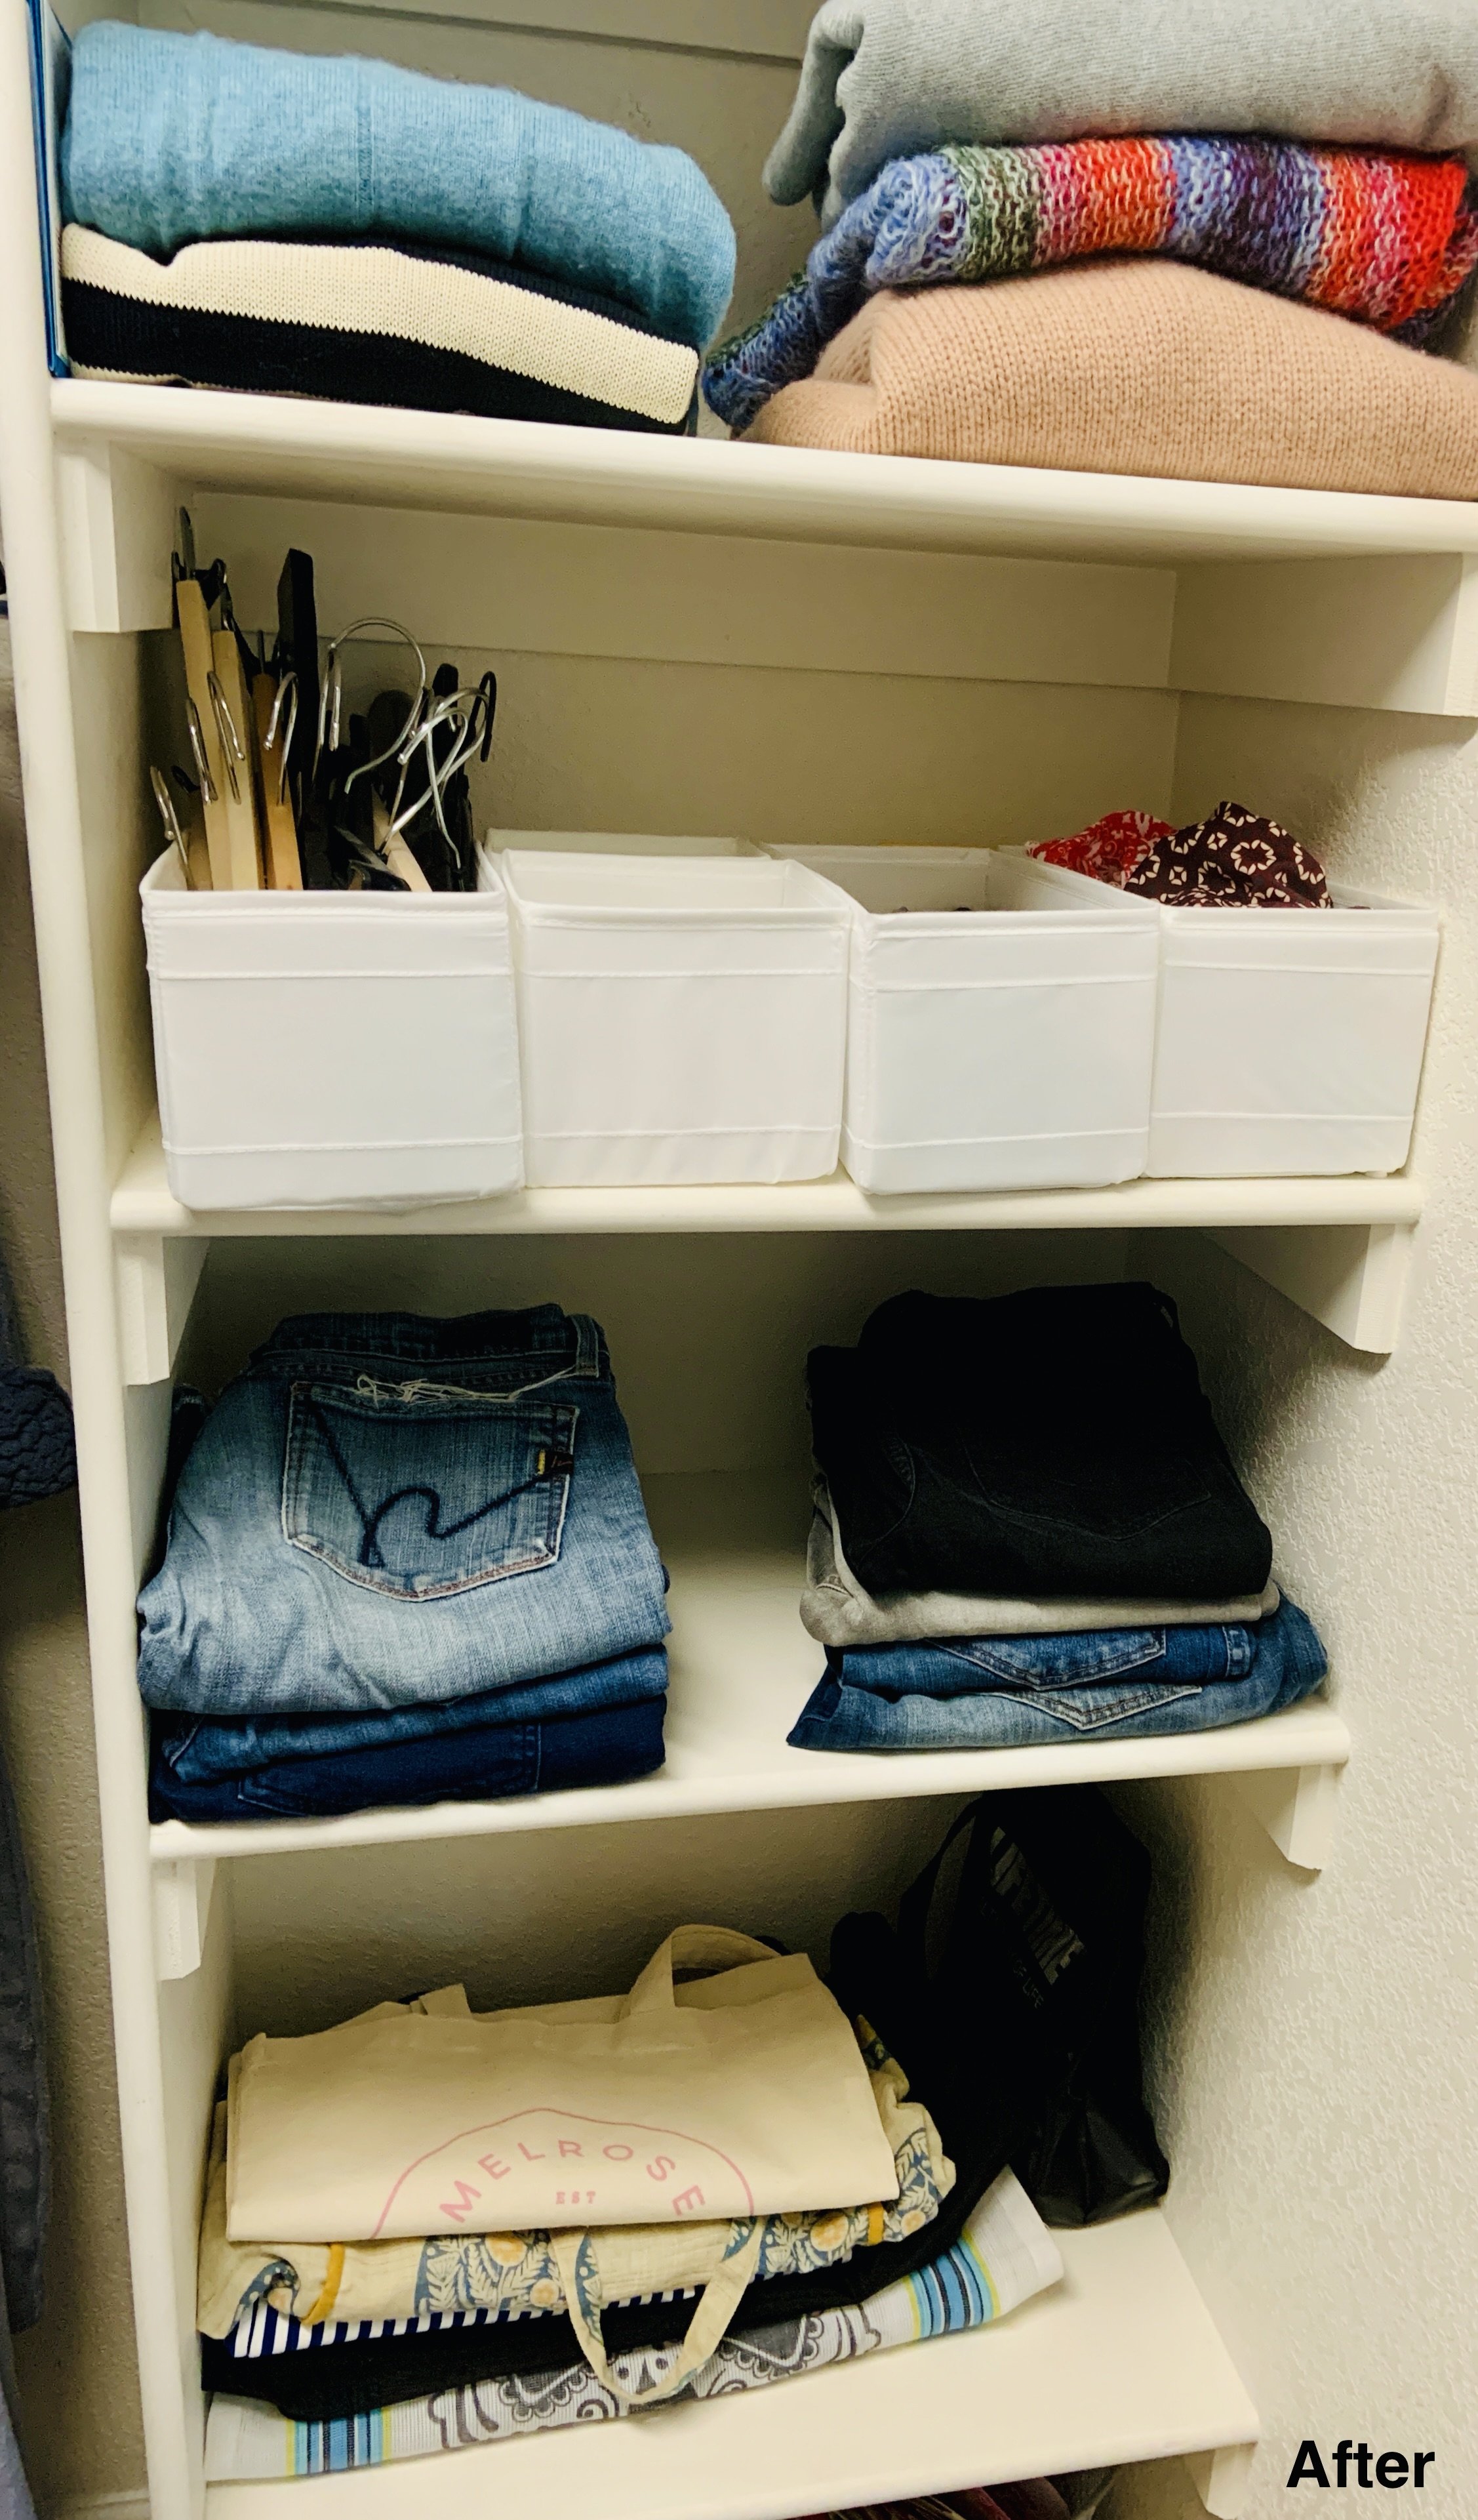 After photo of four white thin rows of wooden shelves with pants and shirts folded neatly and some containers for miscellaneous items.